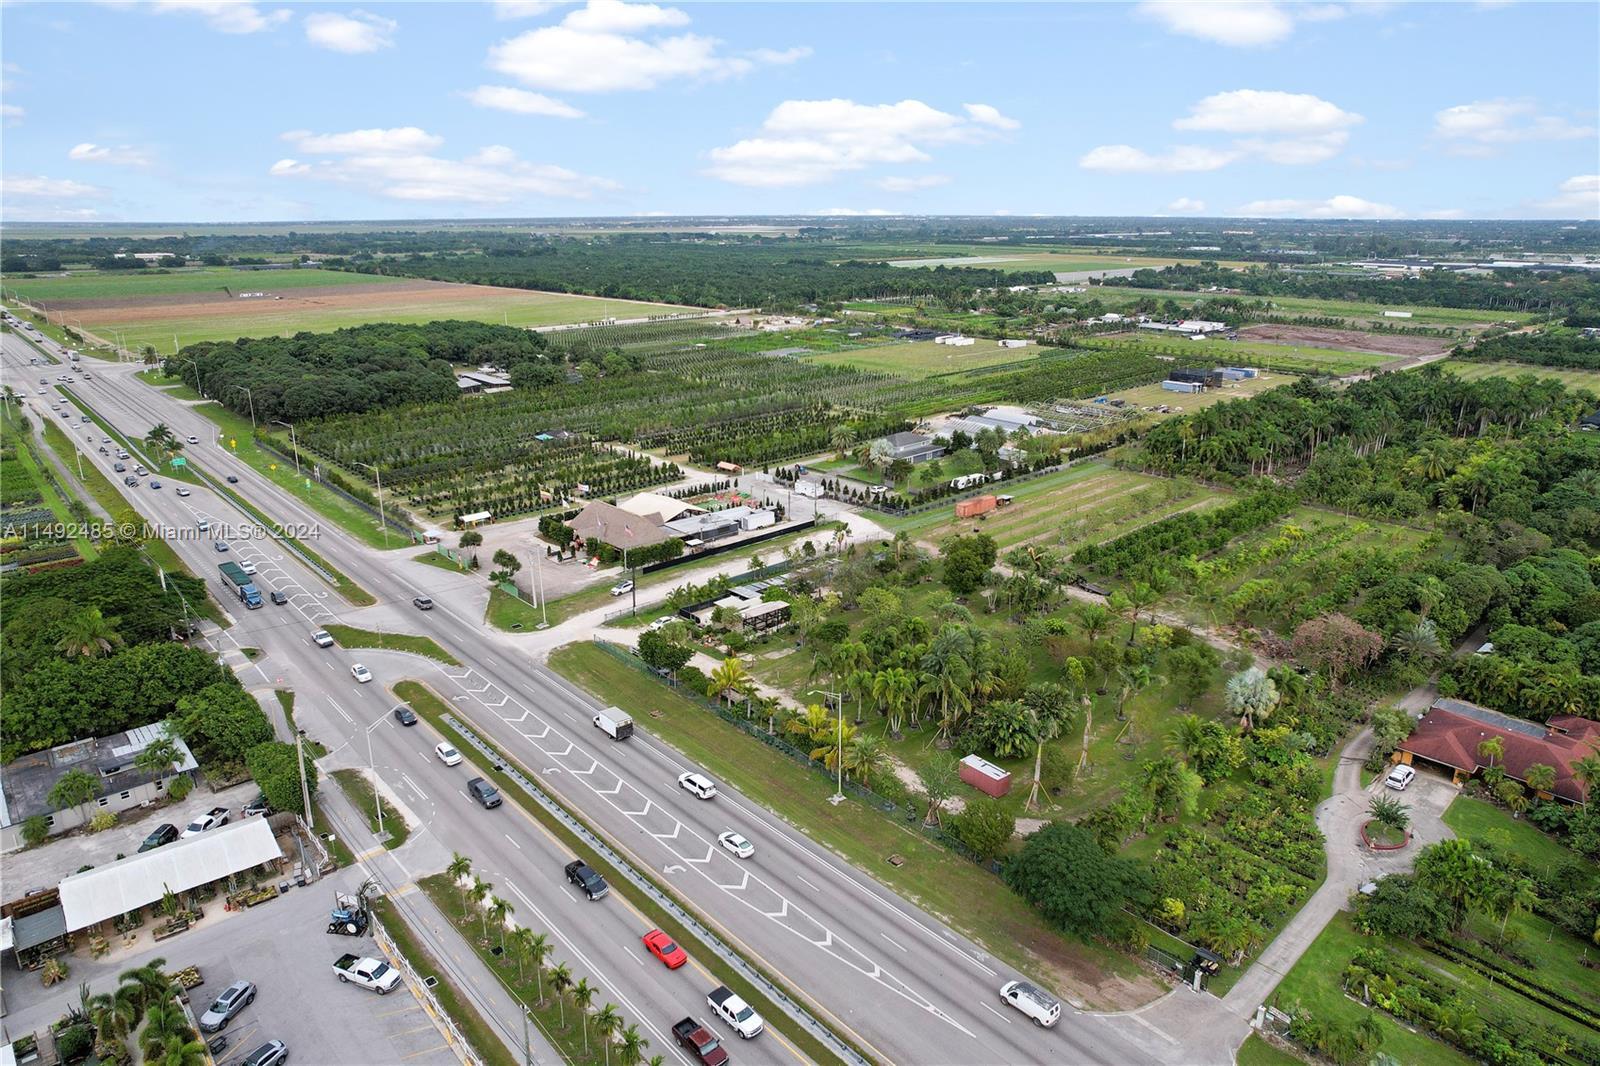 188 SW 188 ST ON 177 AVE, Unincorporated Dade County, Commercial Land,  for sale, Test Realtyworld broker